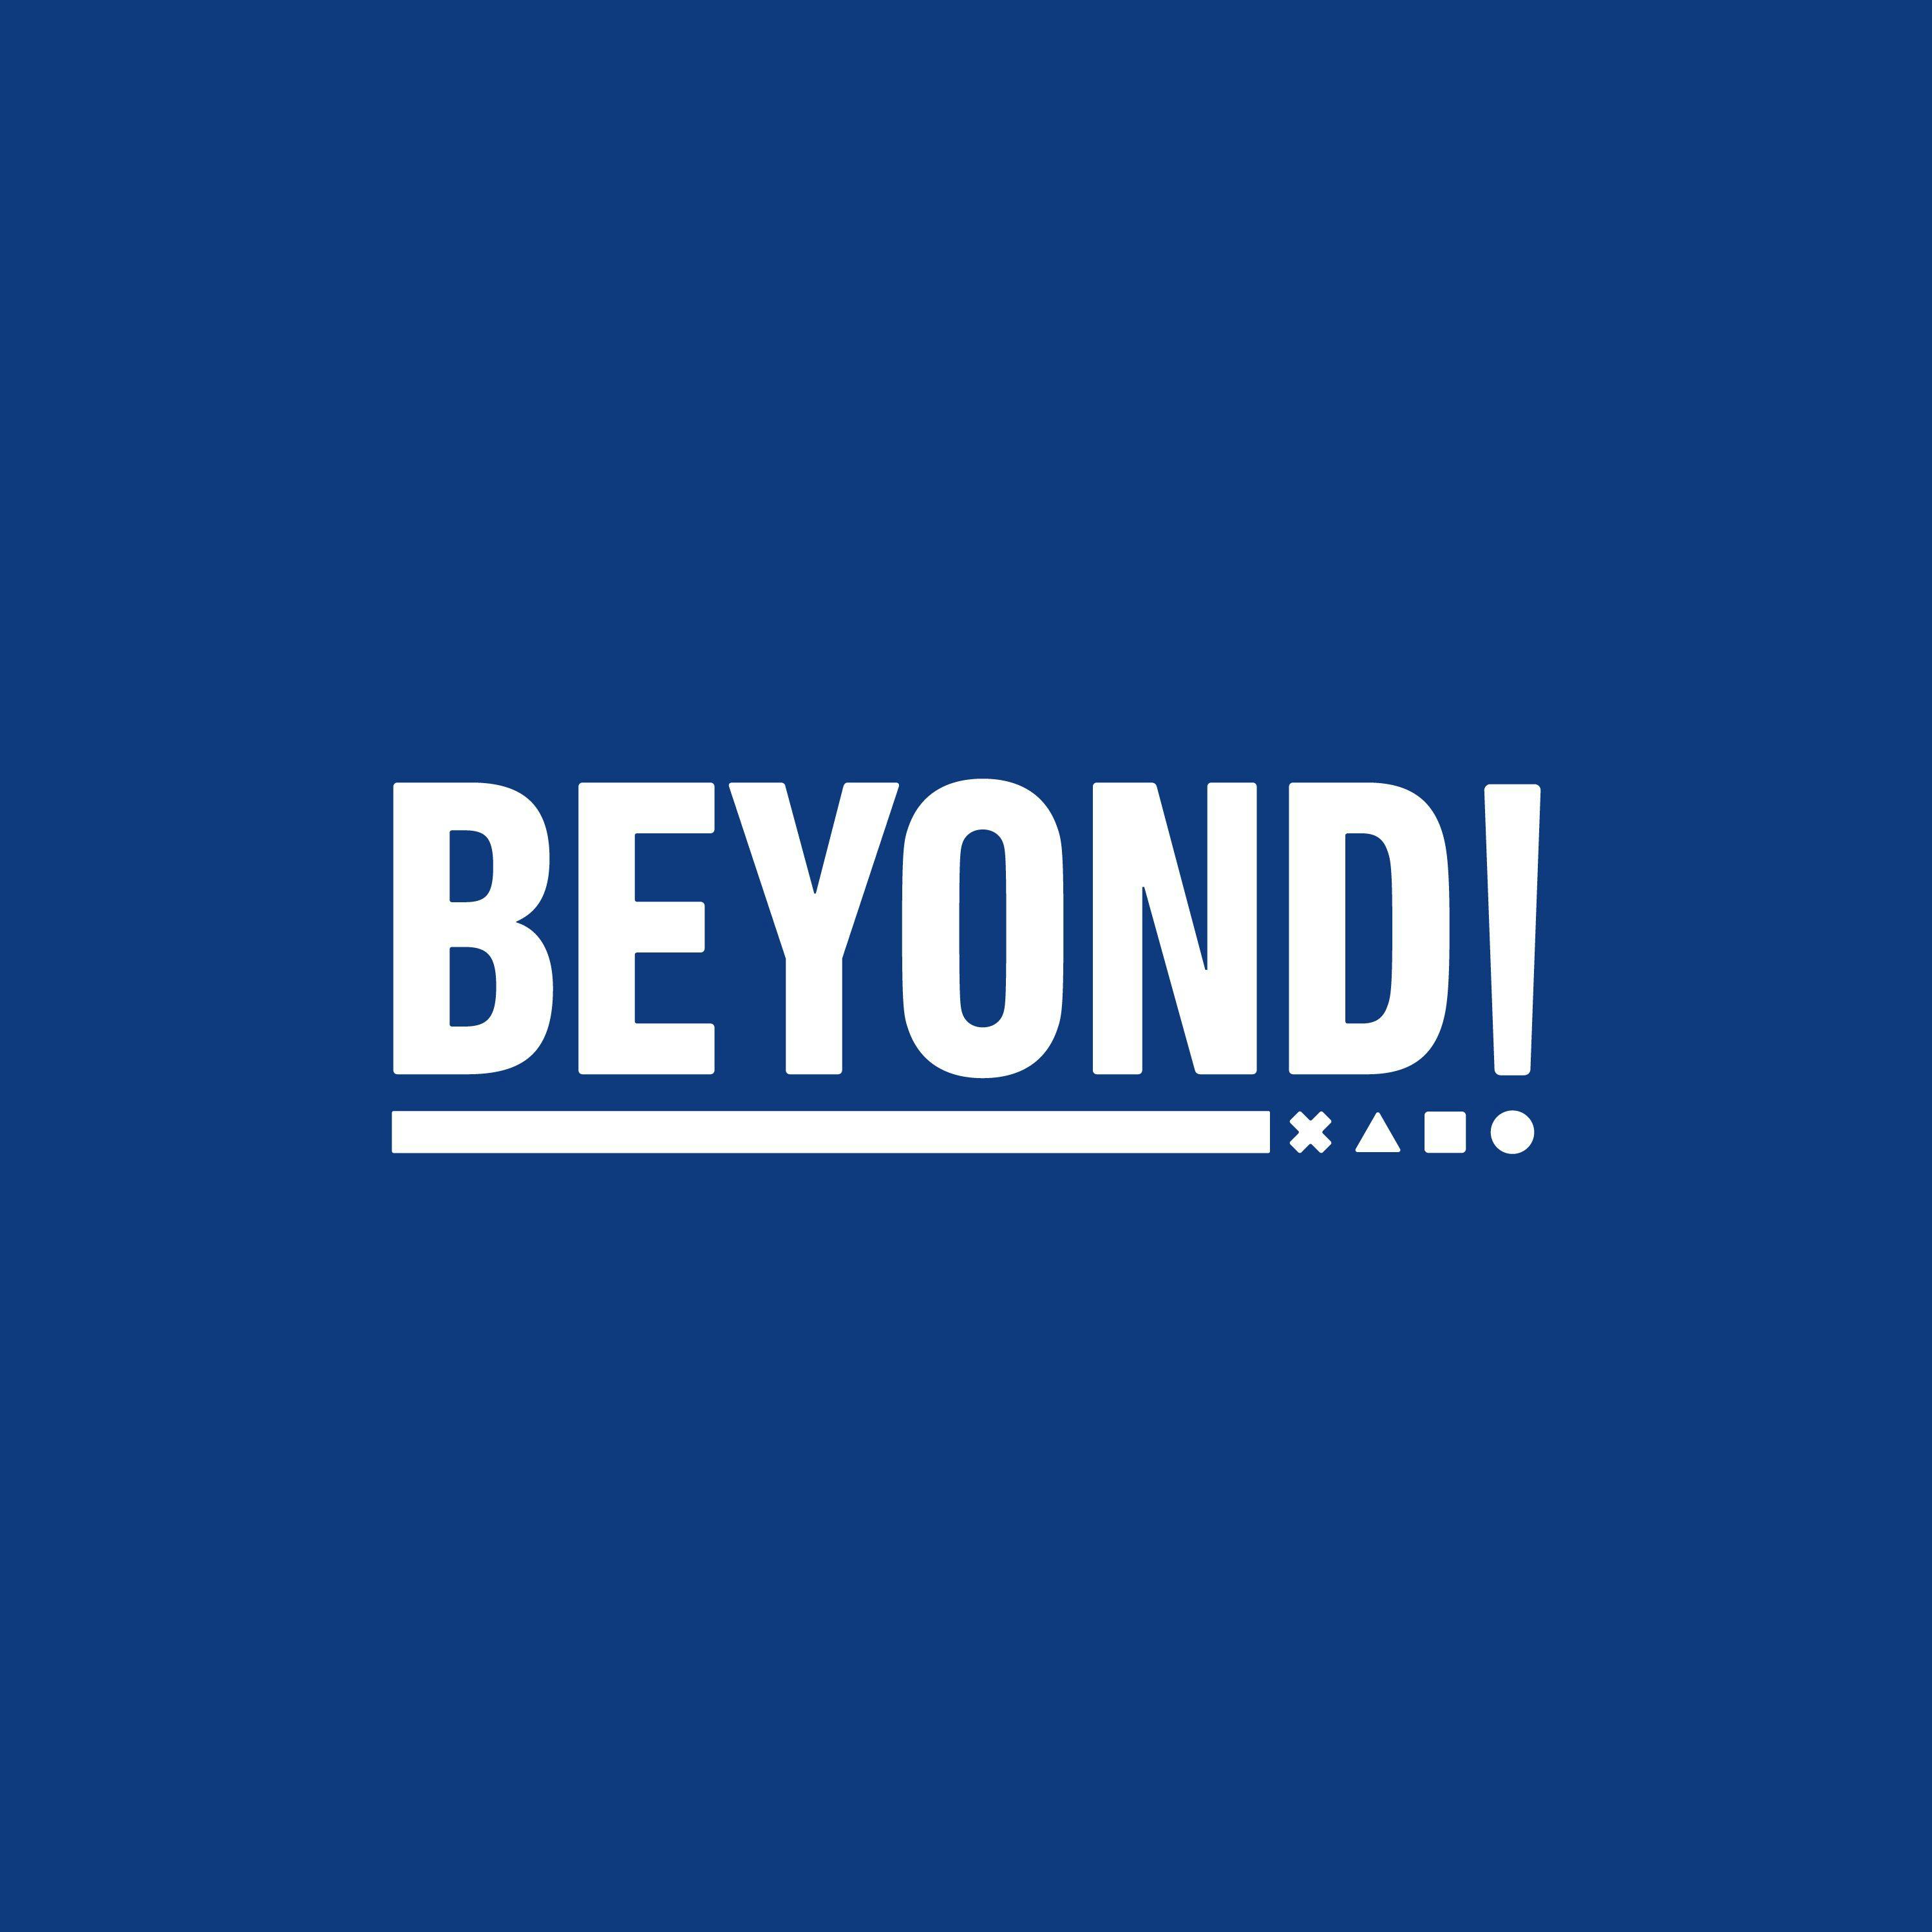 PlayStation Plus Is on a Hot Streak - Beyond Episode 690